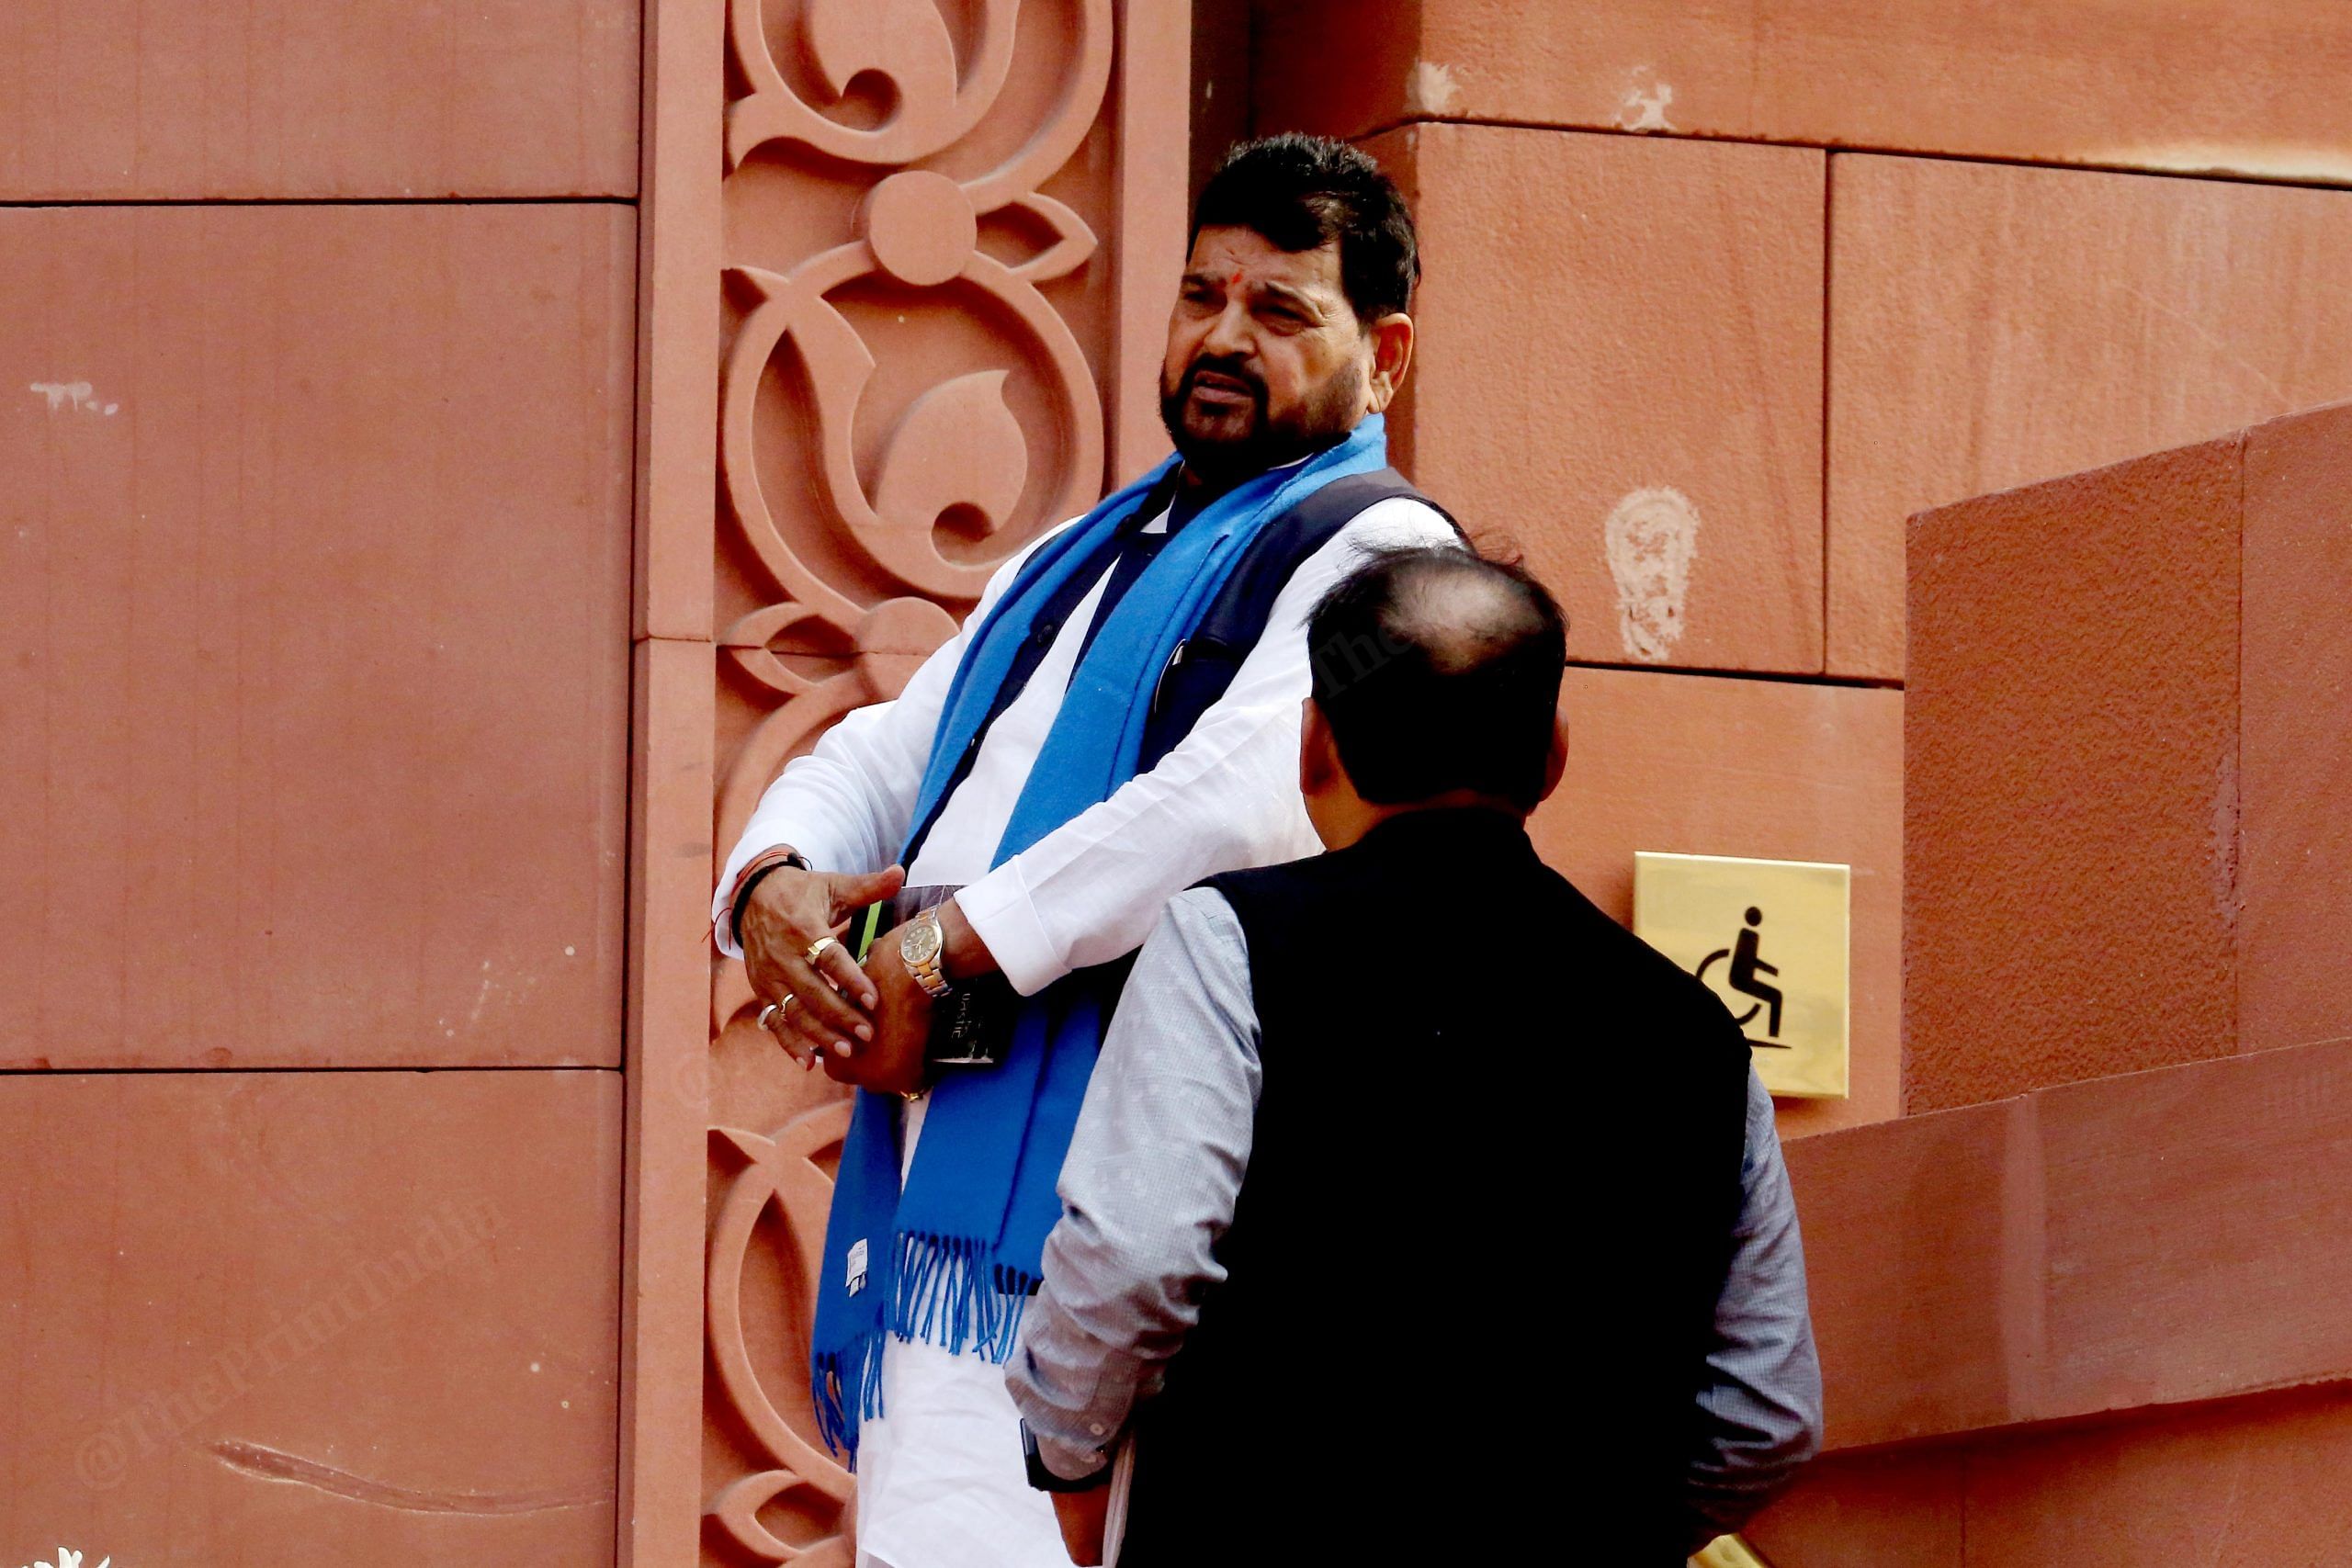 Member of Parliament Brij Bhushan Sharan Singh outside the Parliament house on the first day of winter Session | Praveen Jain | ThePrint